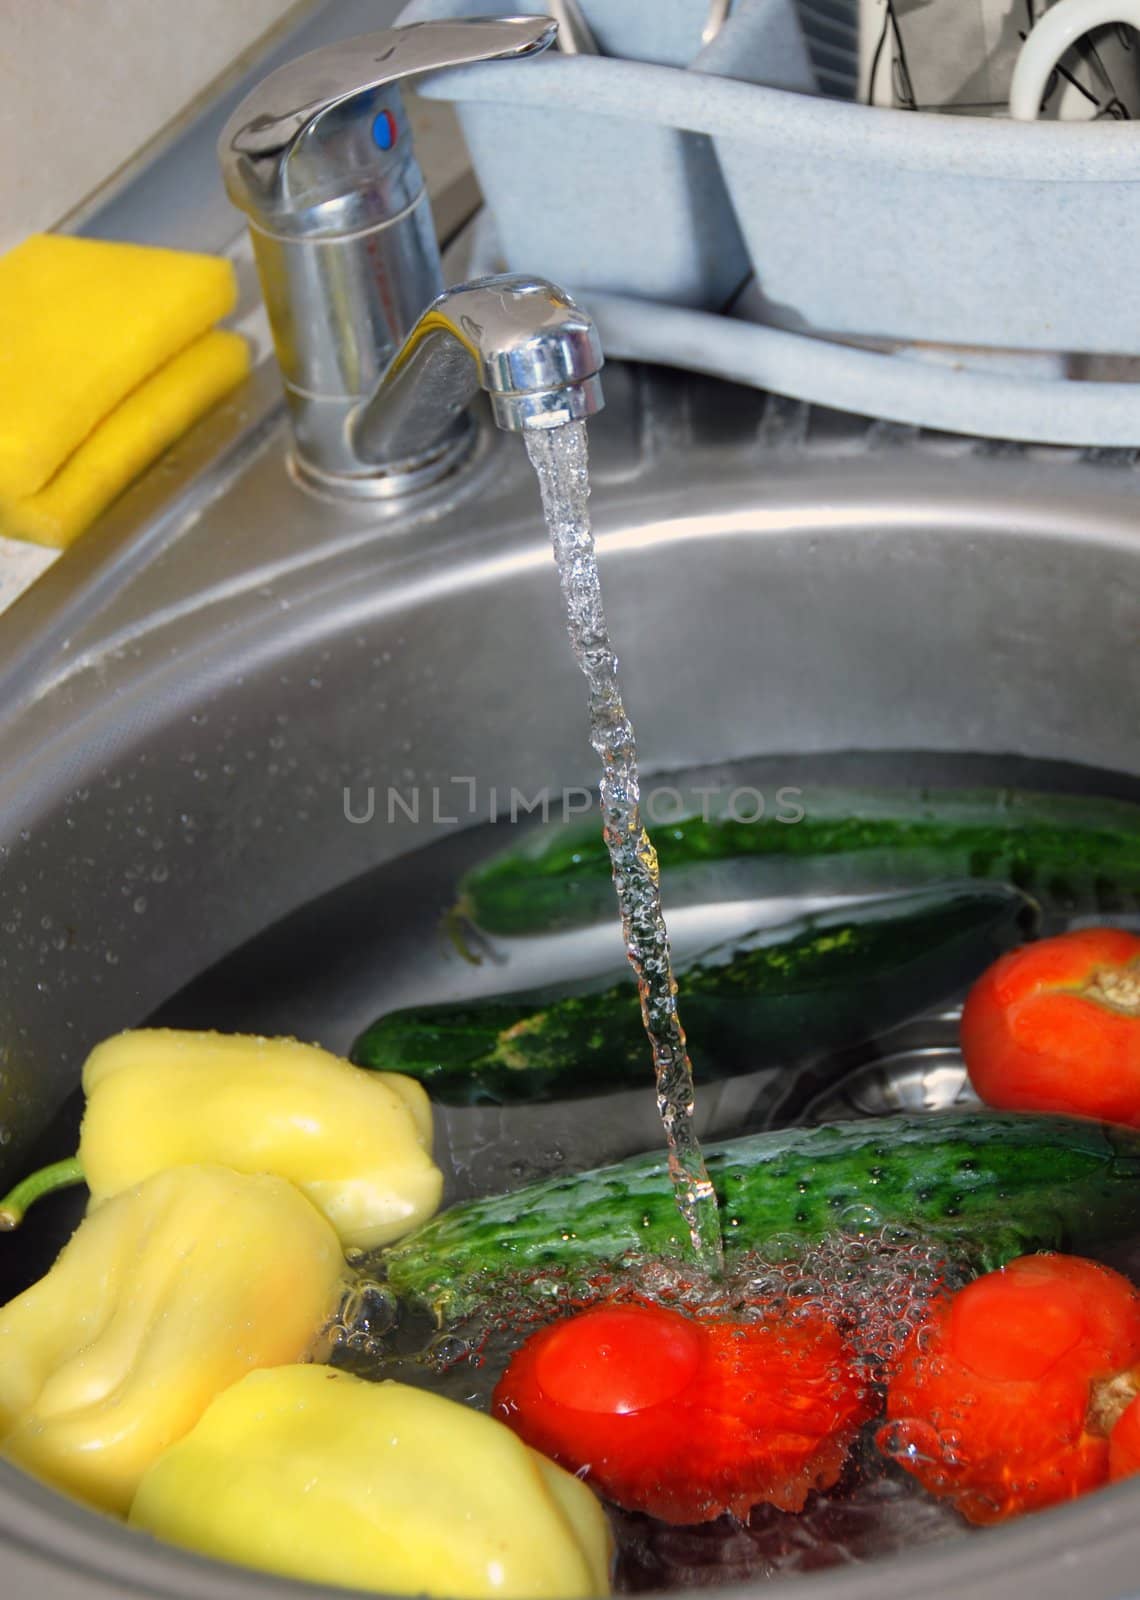 washing tomatoes, cucumbers and paprika in water in kitchen sink